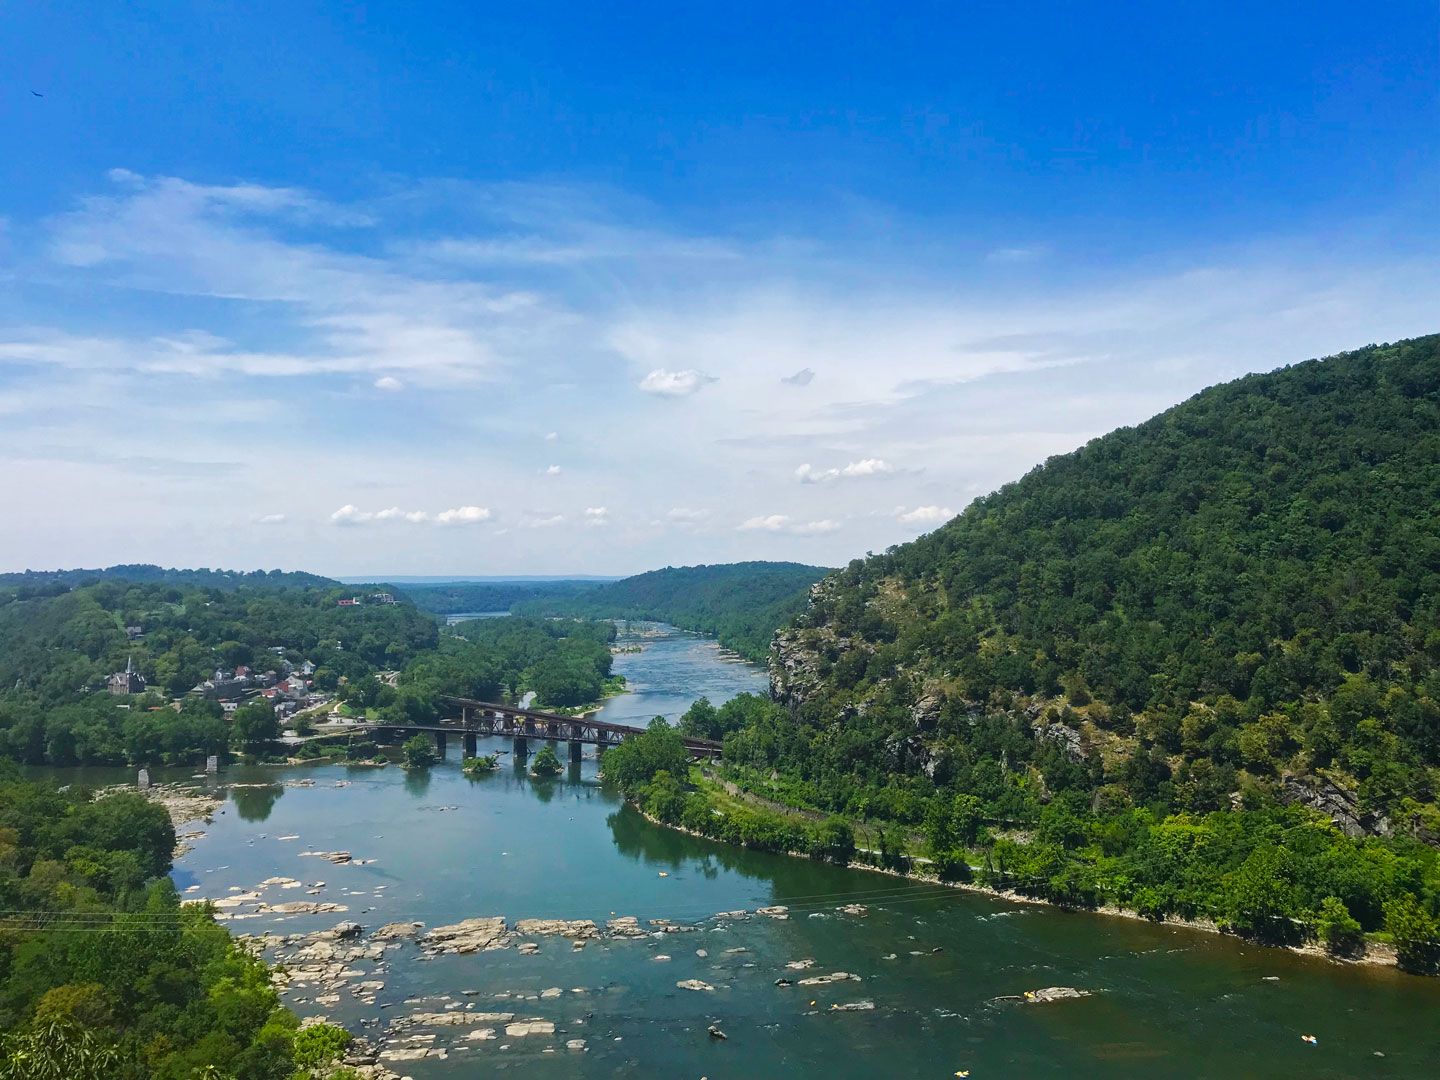 The Shendandoah and Potomac Rivers converge along The trail in historic Harpers Ferry, West Virginia. Photo by Estelle Maletz